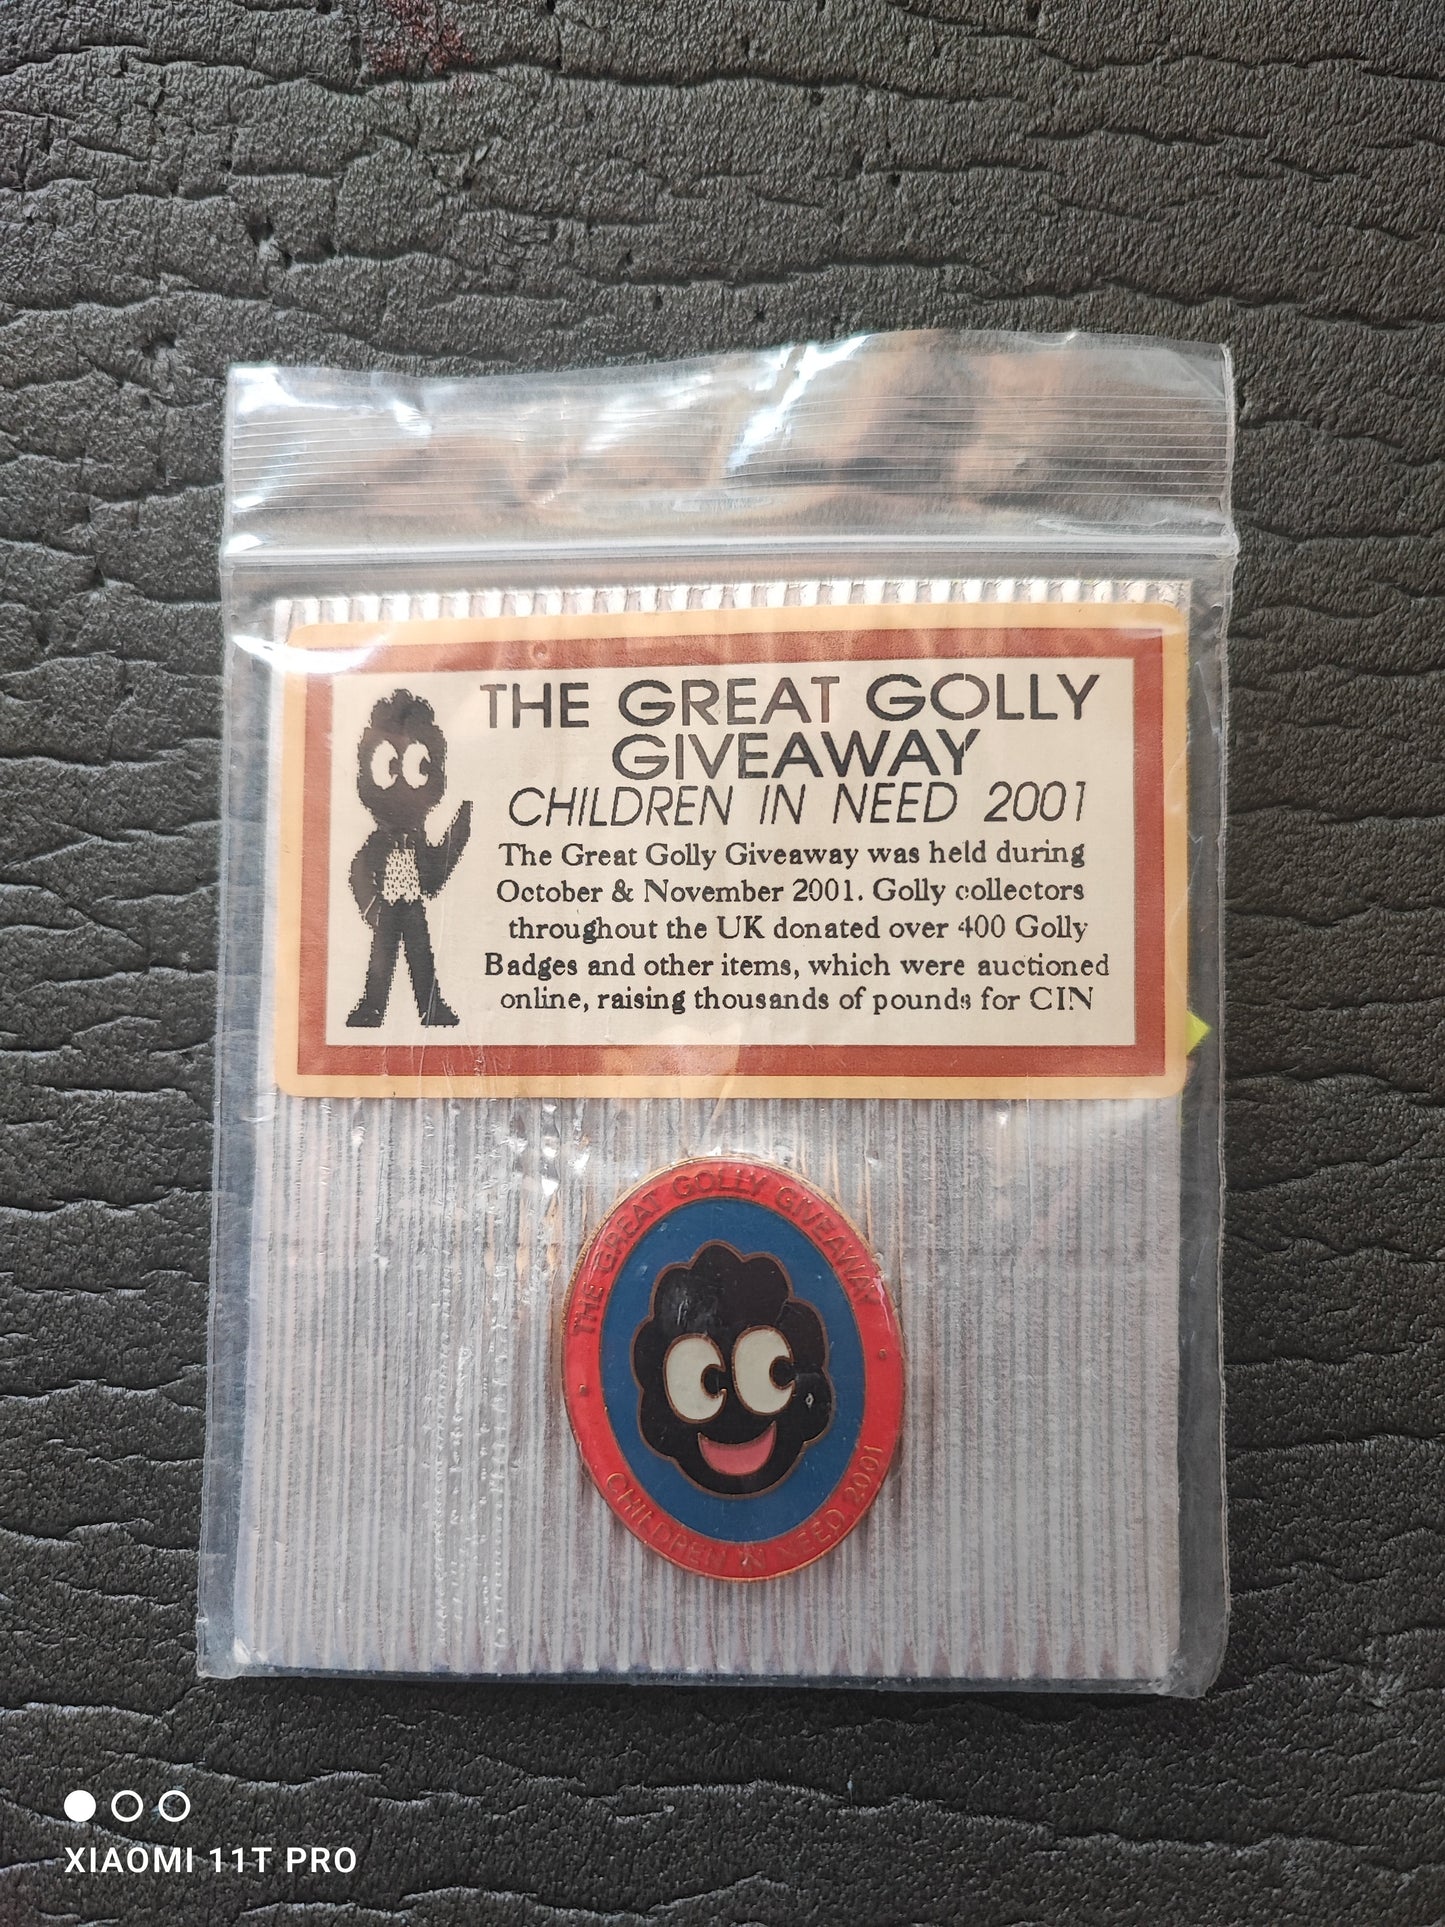 The Great Golly Giveaway Brass Badge in Original Packaging TGGG SILVER CARD